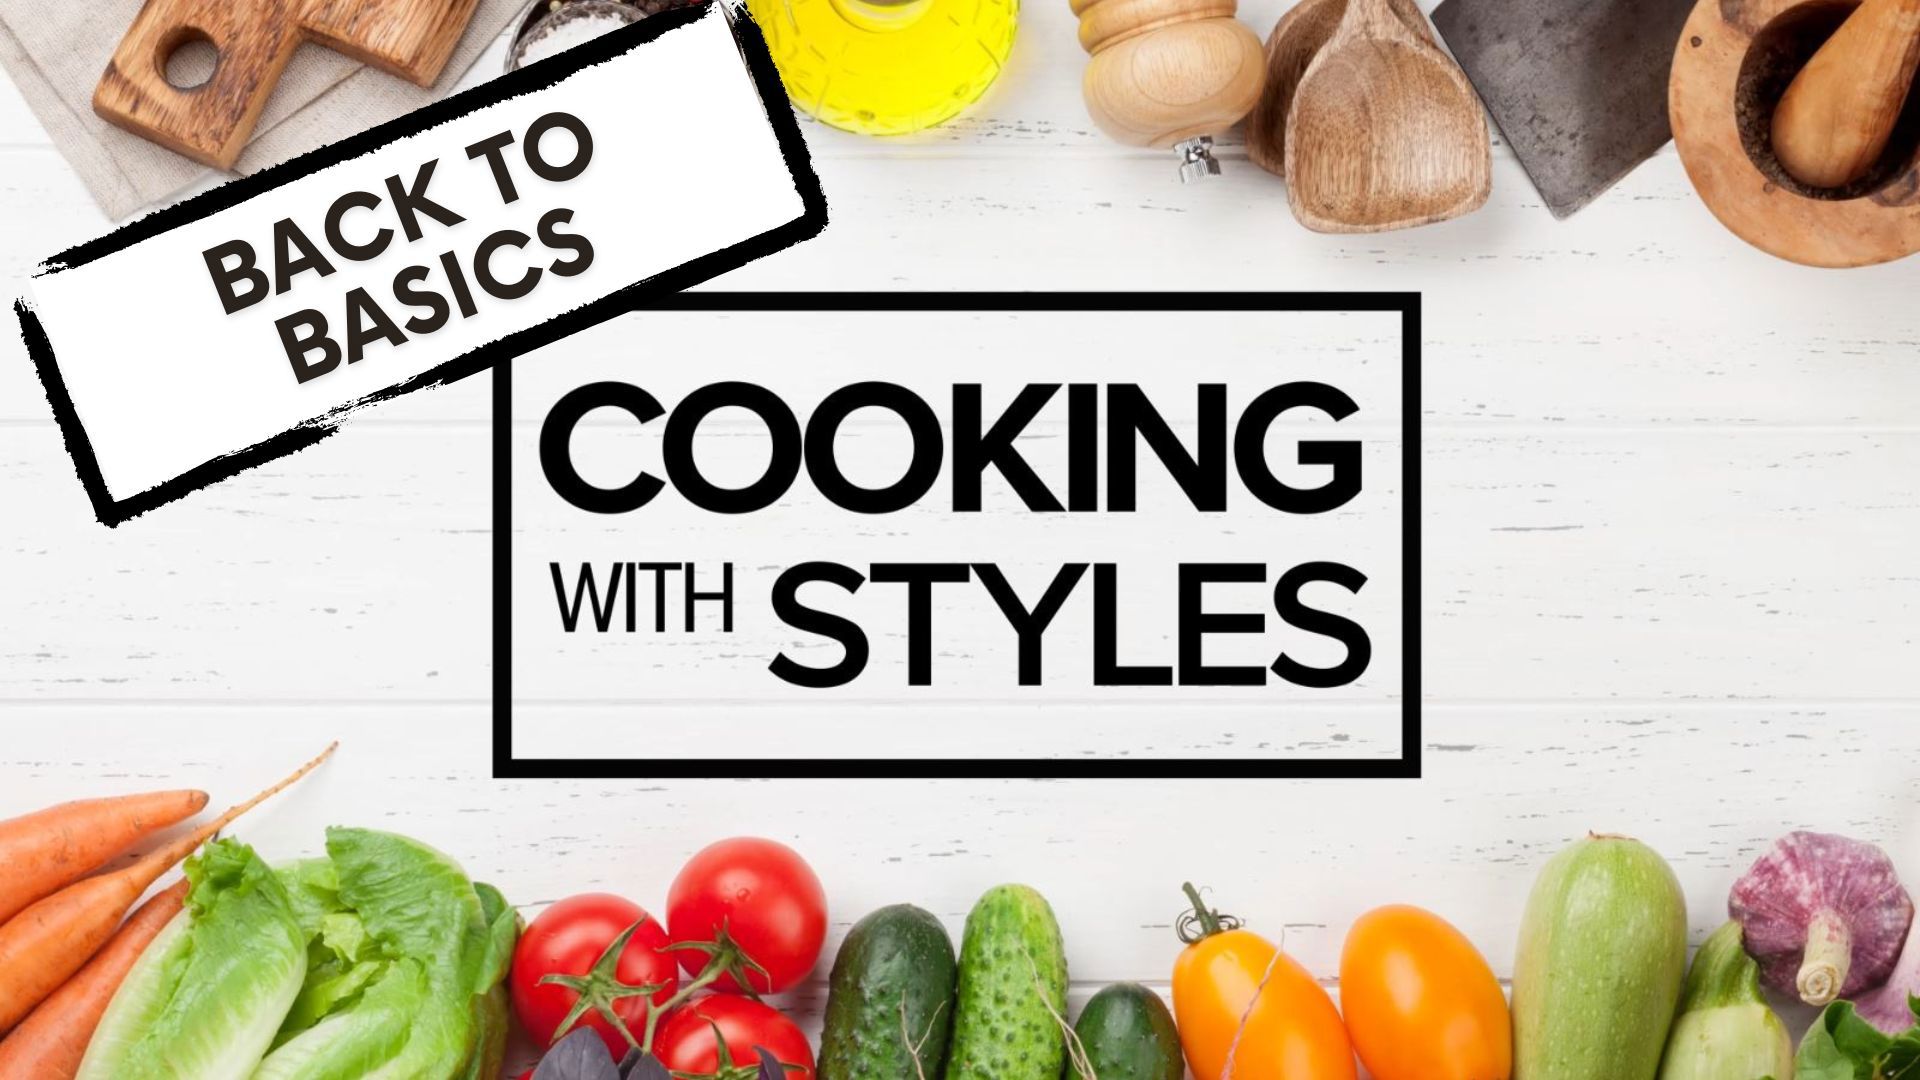 Shawn Styles shares some blueprint recipes that you can use to create your own. Go back to the basics with recipes for salsa, mac and cheese, couscous and more.